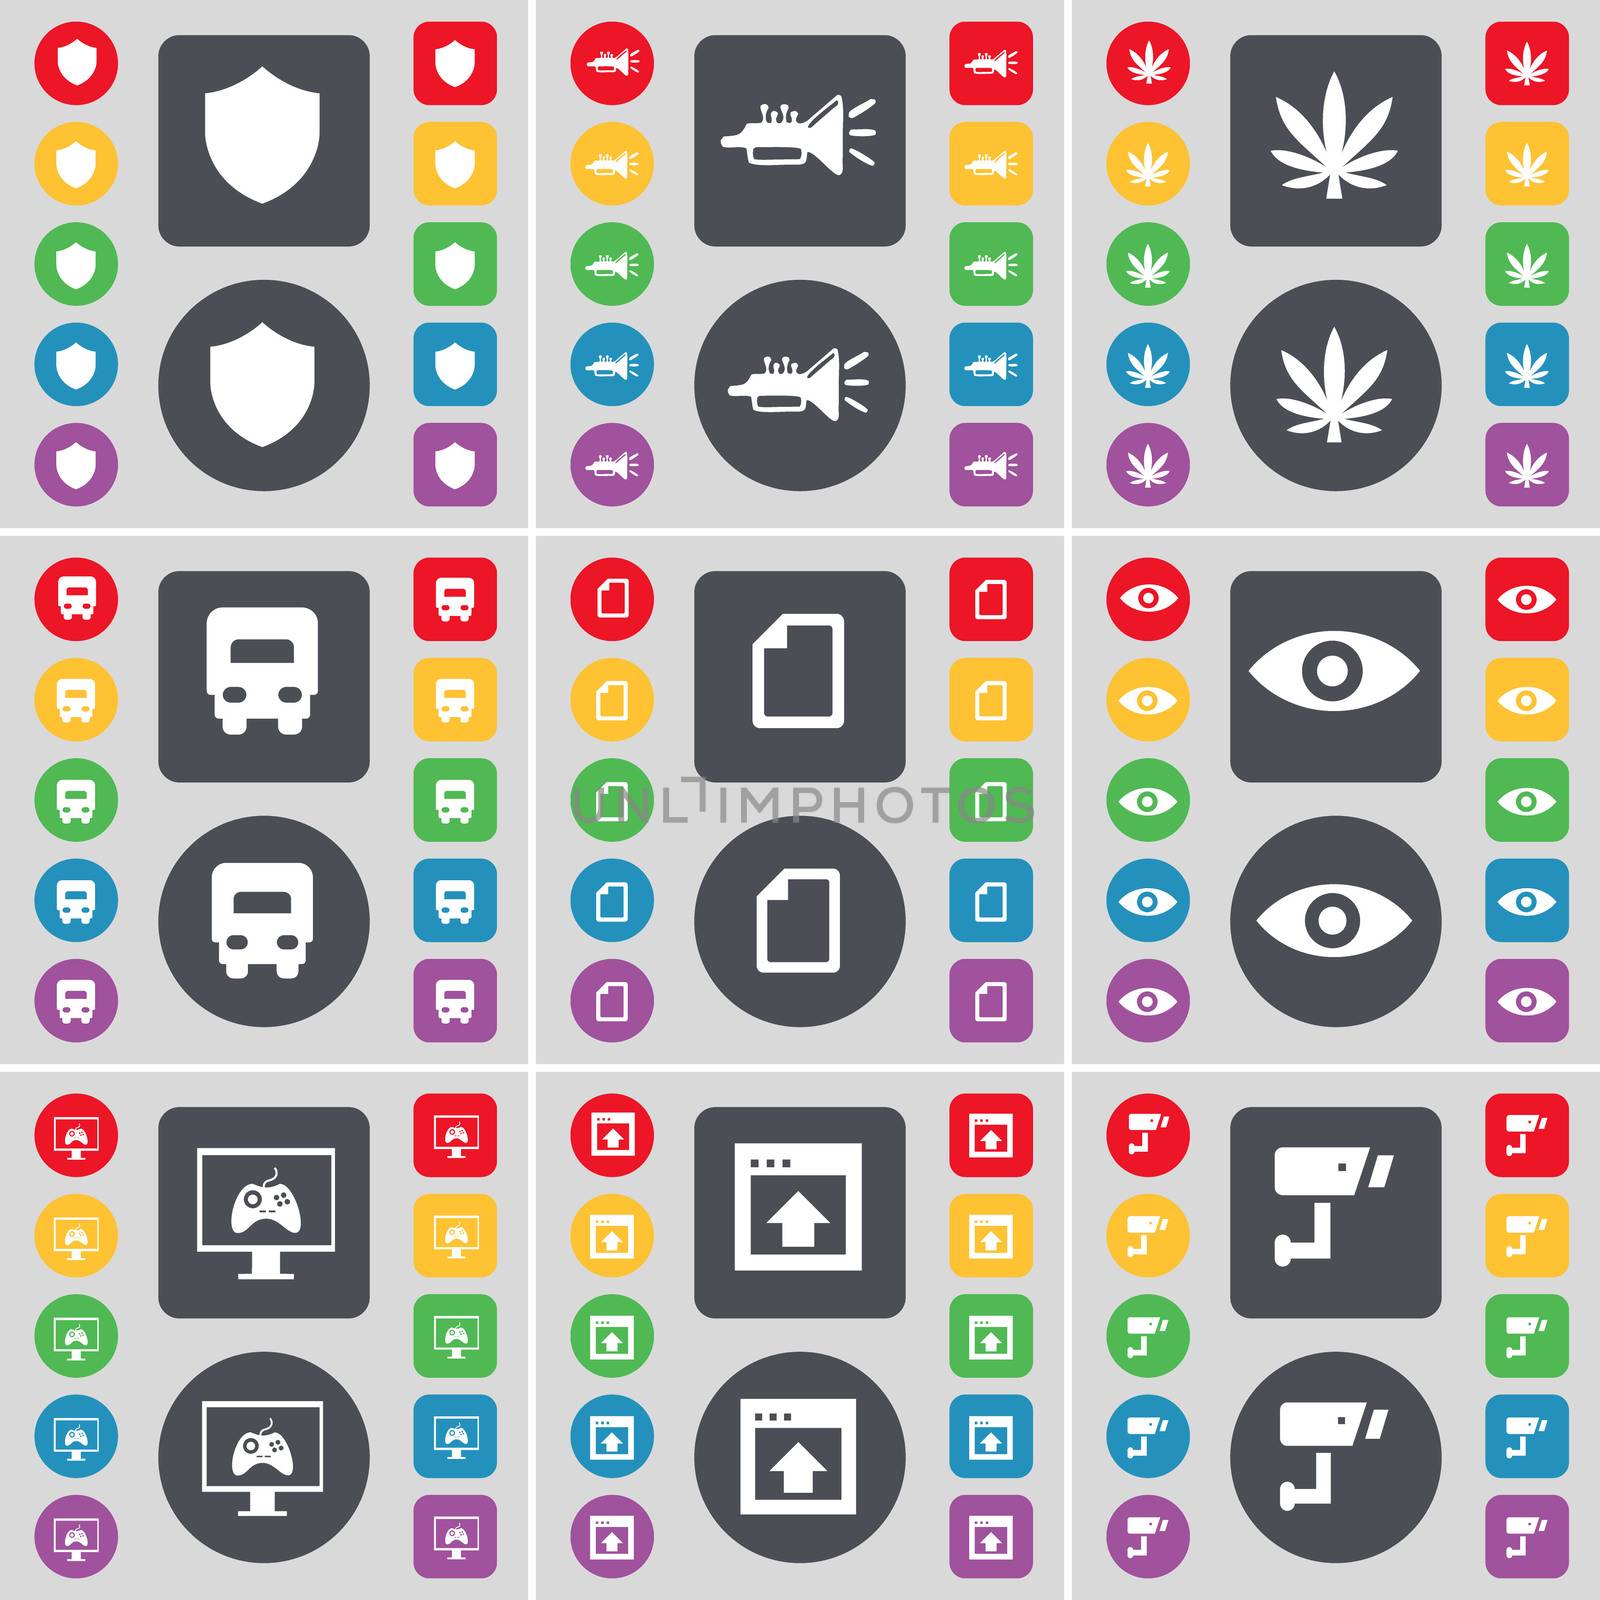 Badge, Trumped, Marijuana, Truck, File, Vision, Monitor, Window, CCTV icon symbol. A large set of flat, colored buttons for your design. illustration